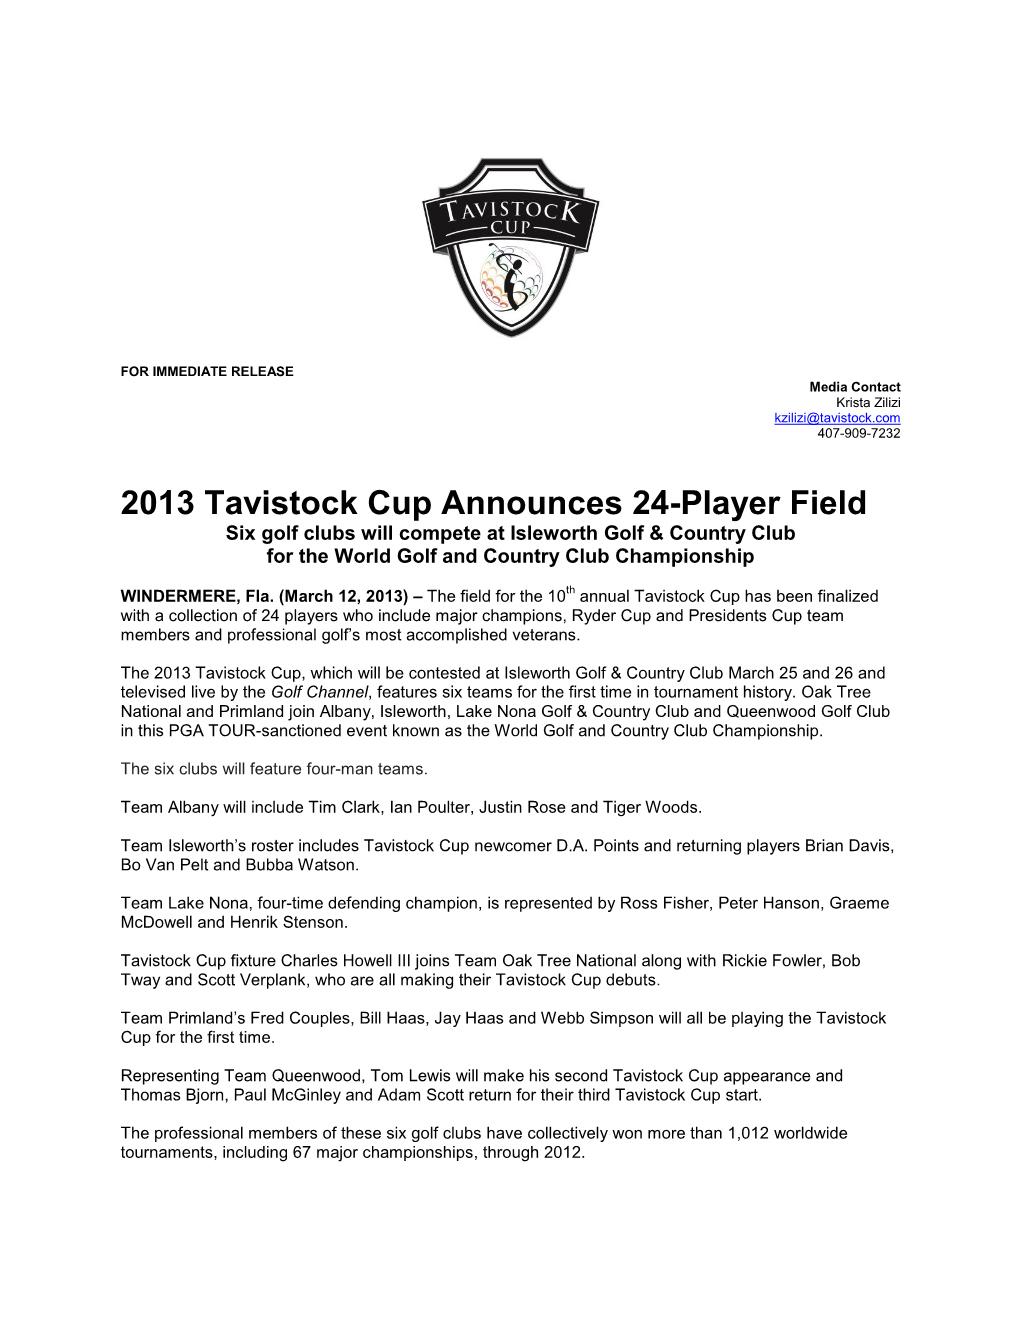 2013 Tavistock Cup Announces 24-Player Field Six Golf Clubs Will Compete at Isleworth Golf & Country Club for the World Golf and Country Club Championship